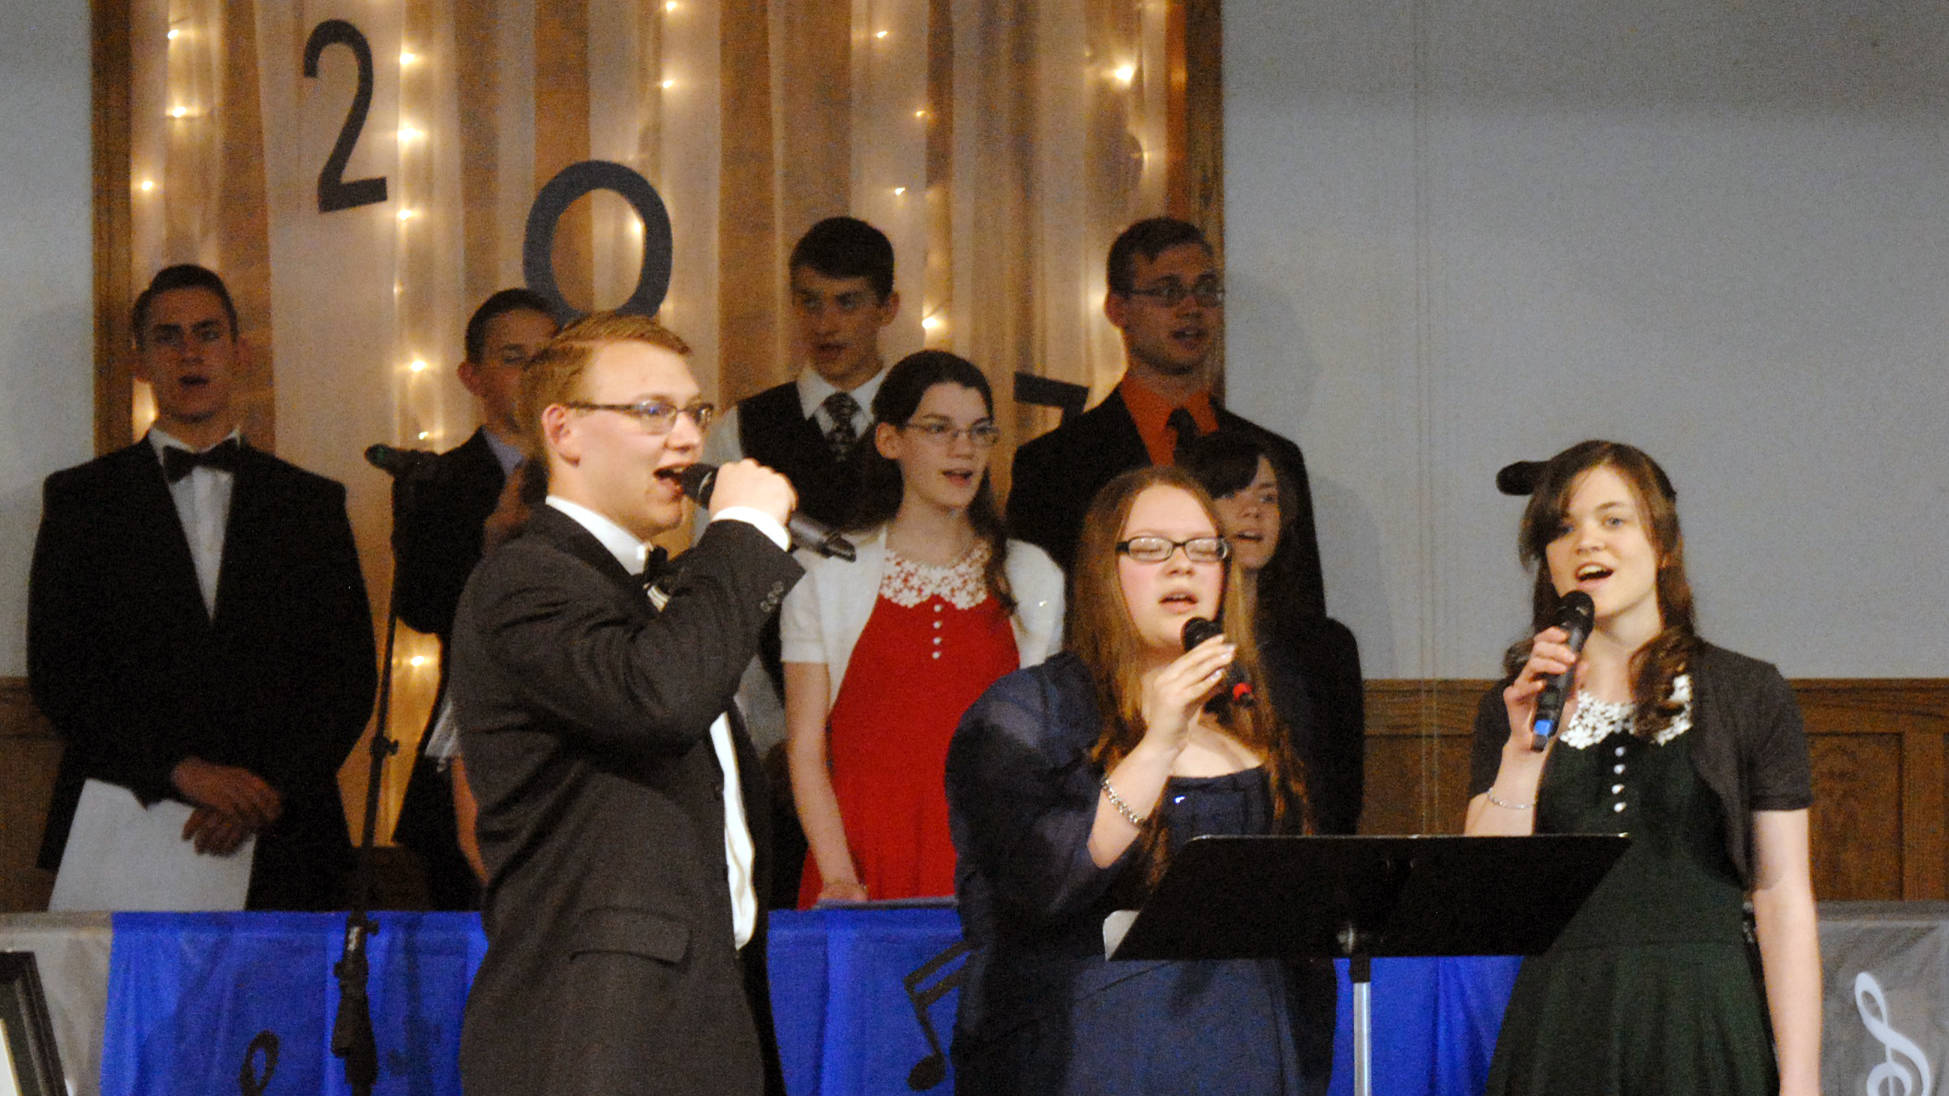 Elijah Newbern, left, Ellimarie Bravo-Moe and Shelby Noel sing “I Have Been Blessed” at their graduation ceremony on Friday, May 19, 2017 at the Immanuel Baptist Church in Kenai, Alaska. Newbern and Bravo-Moe are graduates of the Wings Christian Academy. Noel is a home school graduate. (Kat Sorensen/Peninsula Clarion)